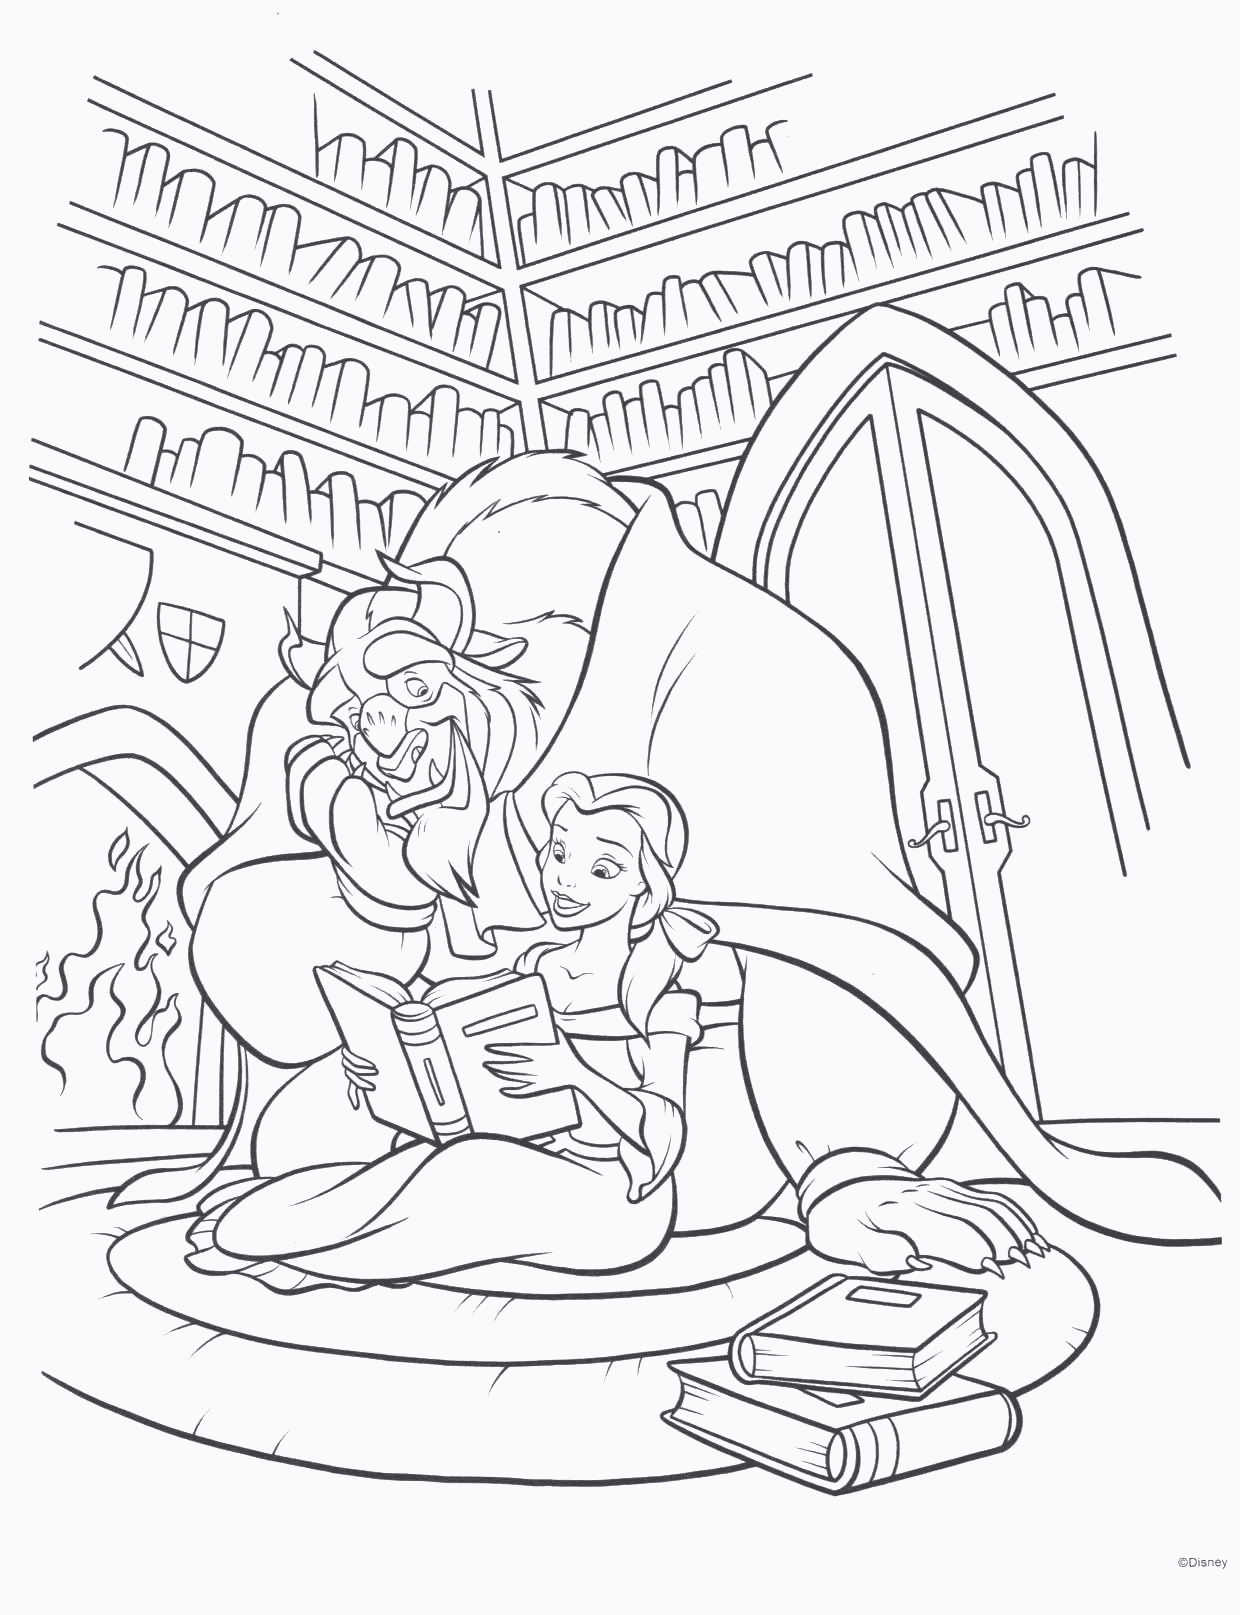 Coloring inspired by a Disney classic: Beauty and the Beast. This Disney classic was released in 1991